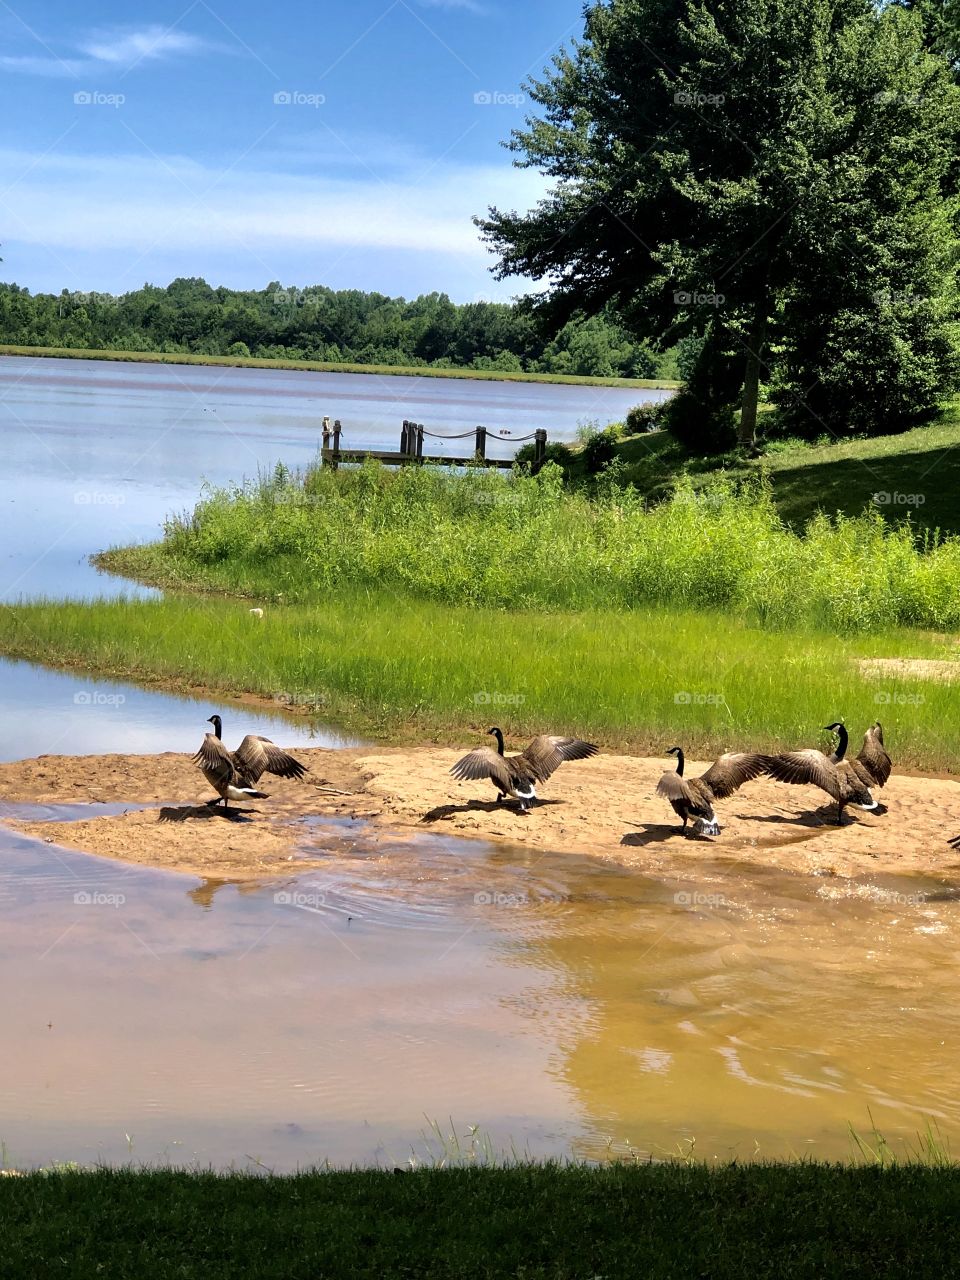 Just another candid shot of the Canadian geese taking flight from our neighborhood lakeshore.  Summertime at Lake Emory is just peaceful and beautiful.